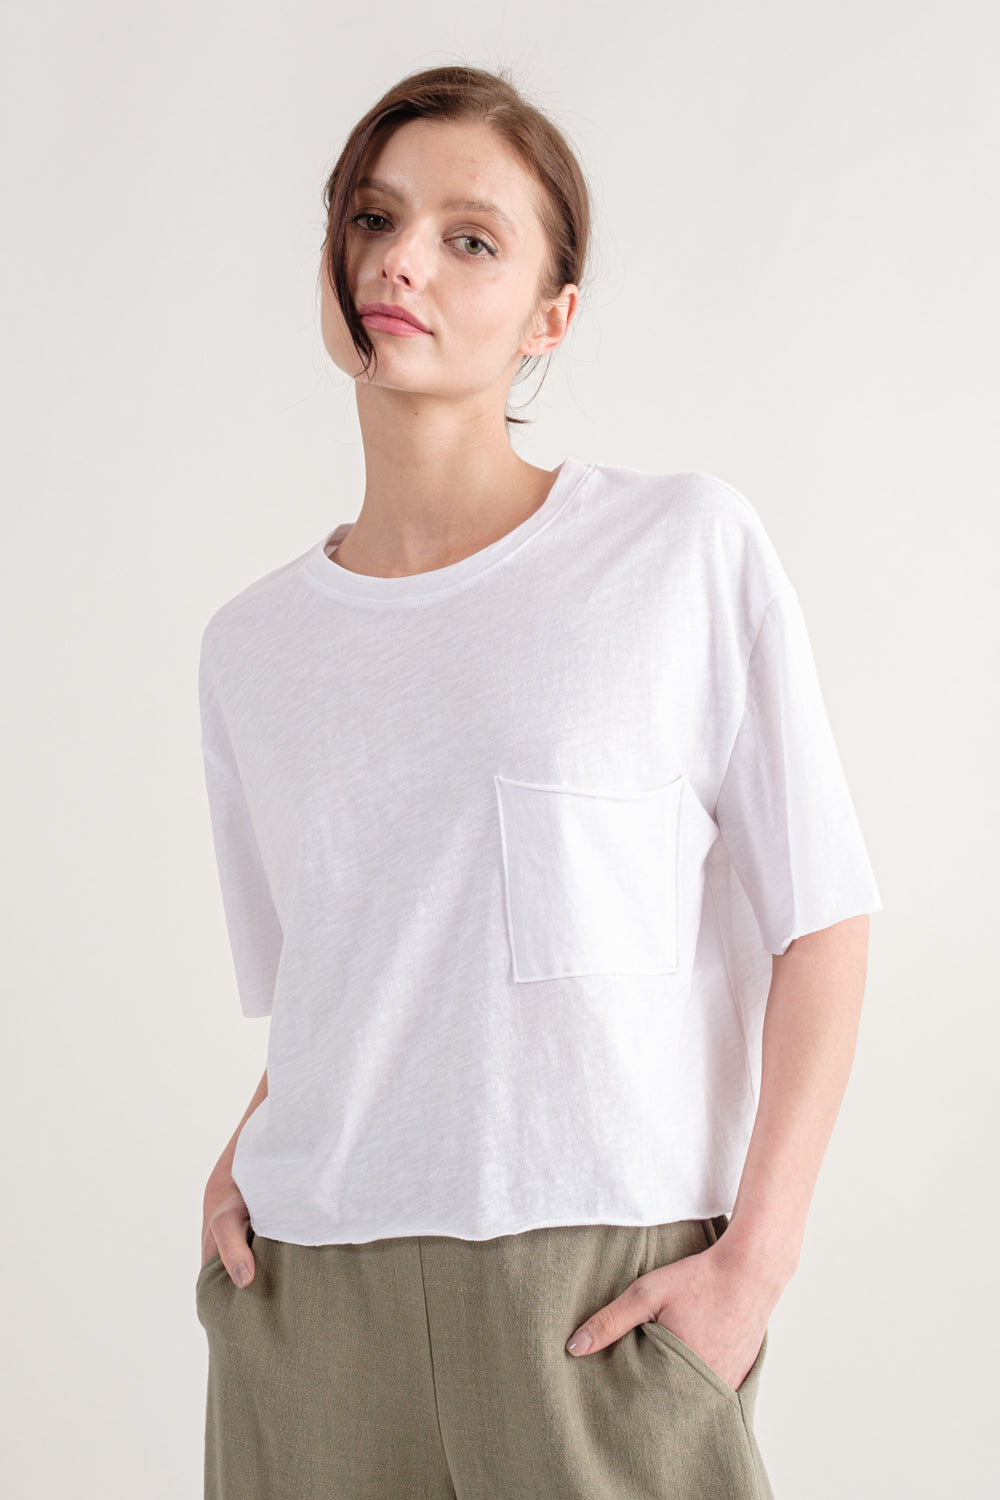 White Slubby Cropped Tee, Short Tee by Wasabi + Mint | LIT Boutique